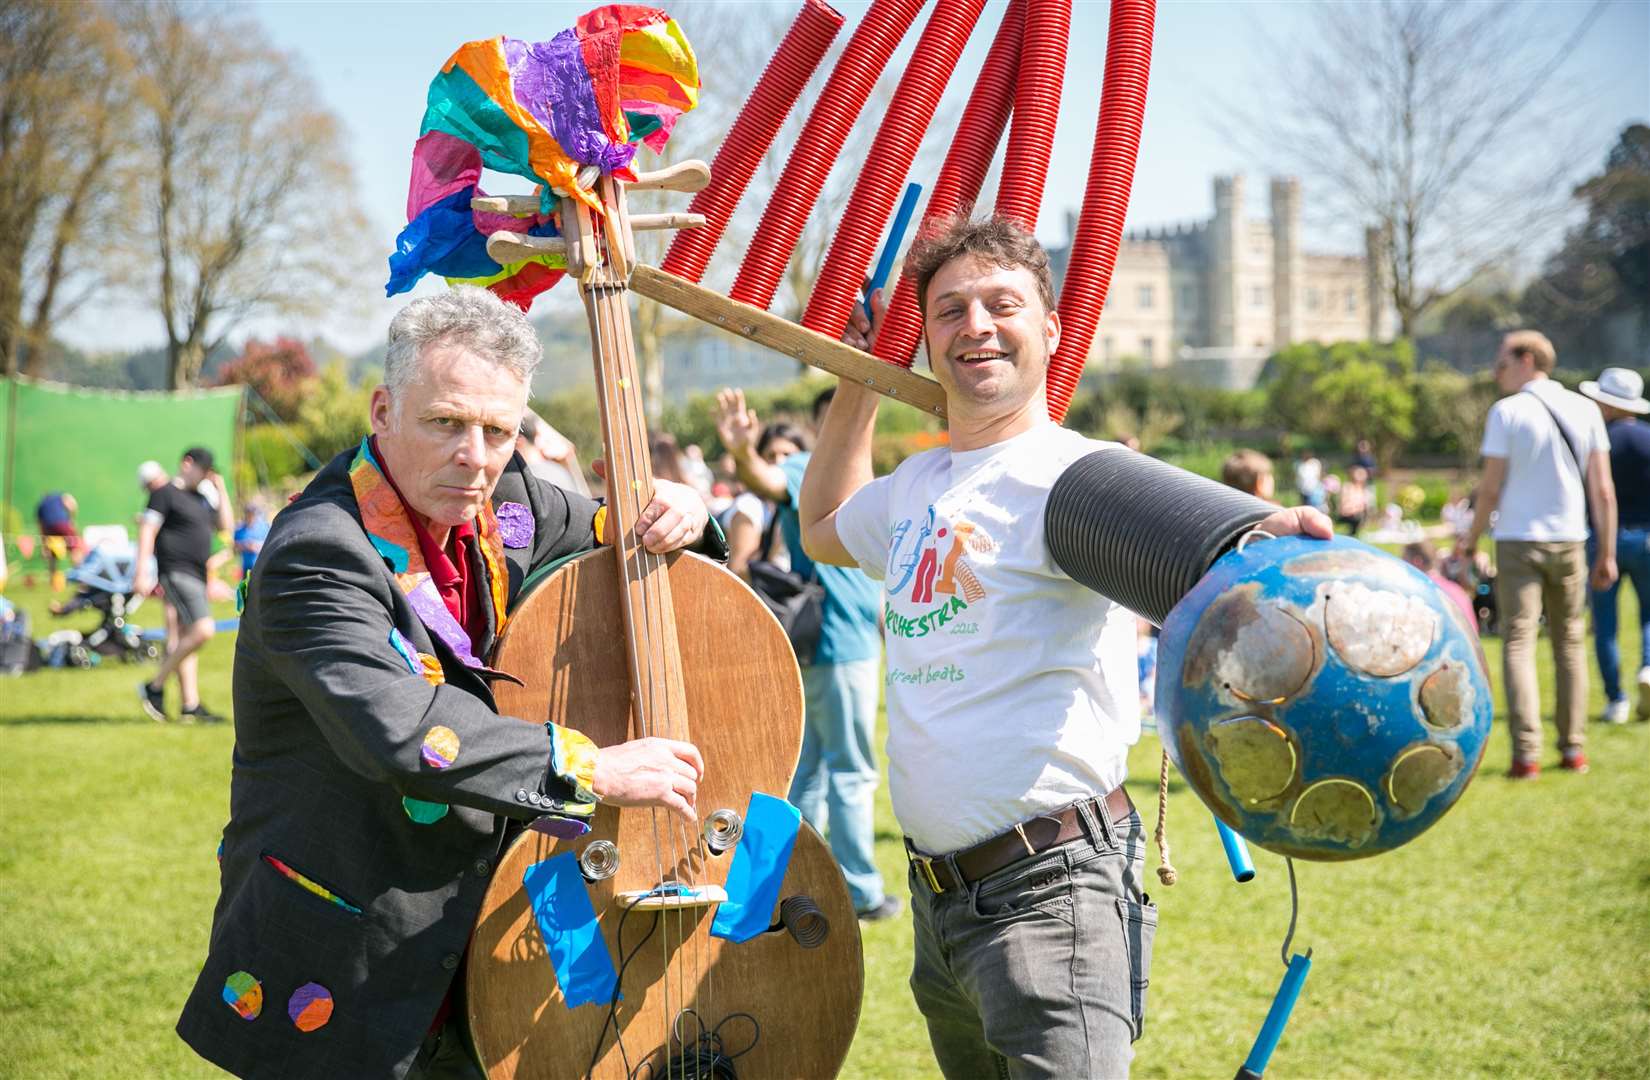 The Junk Orchestra will be at Leeds Castle this Easter